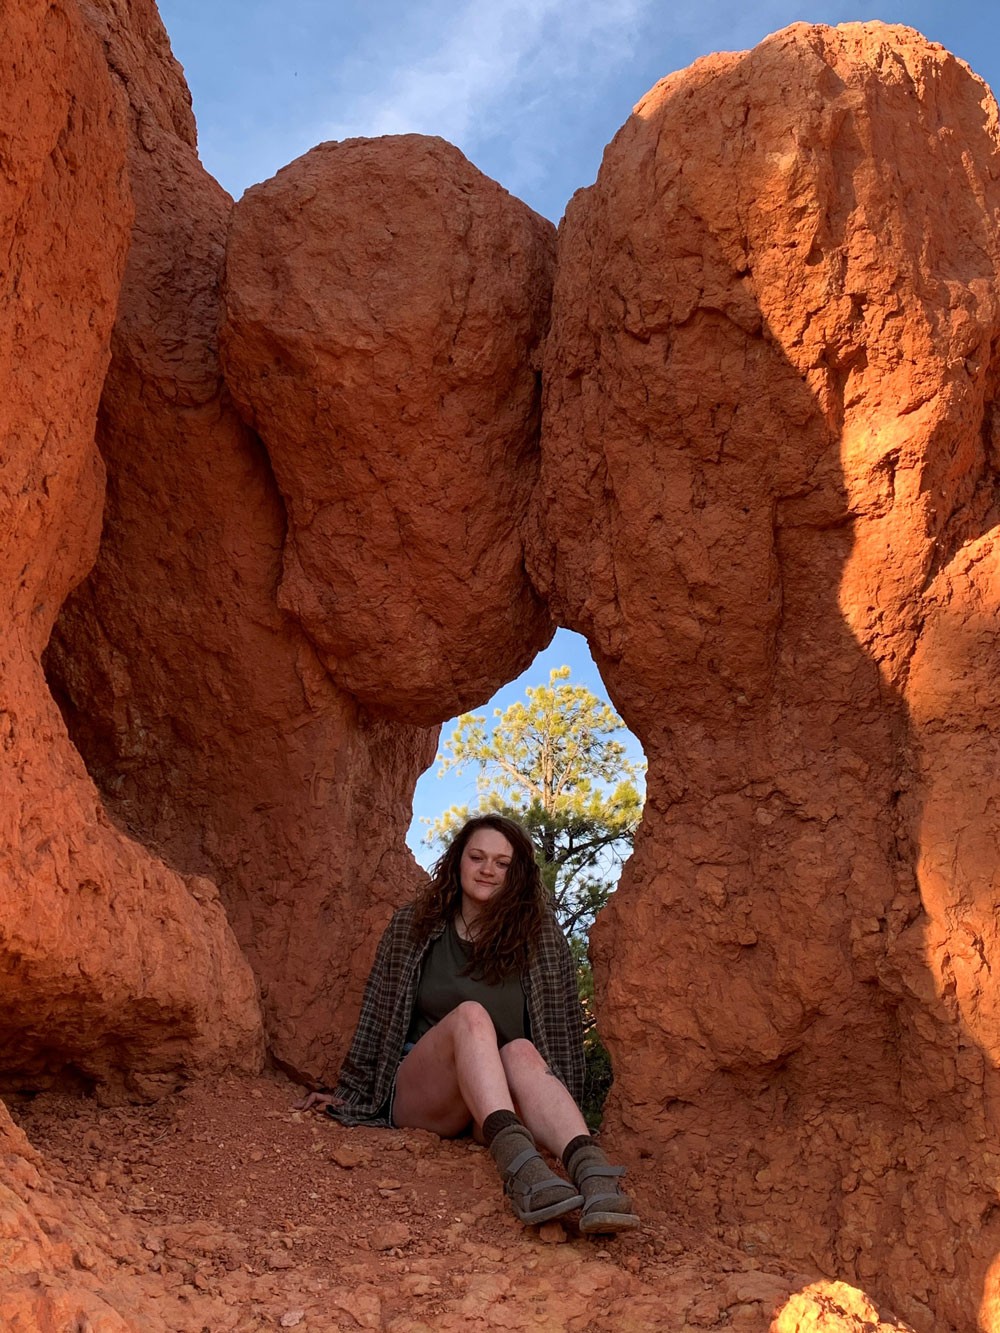 Alli Riebel sits in front of a natural window in a redrock formation.